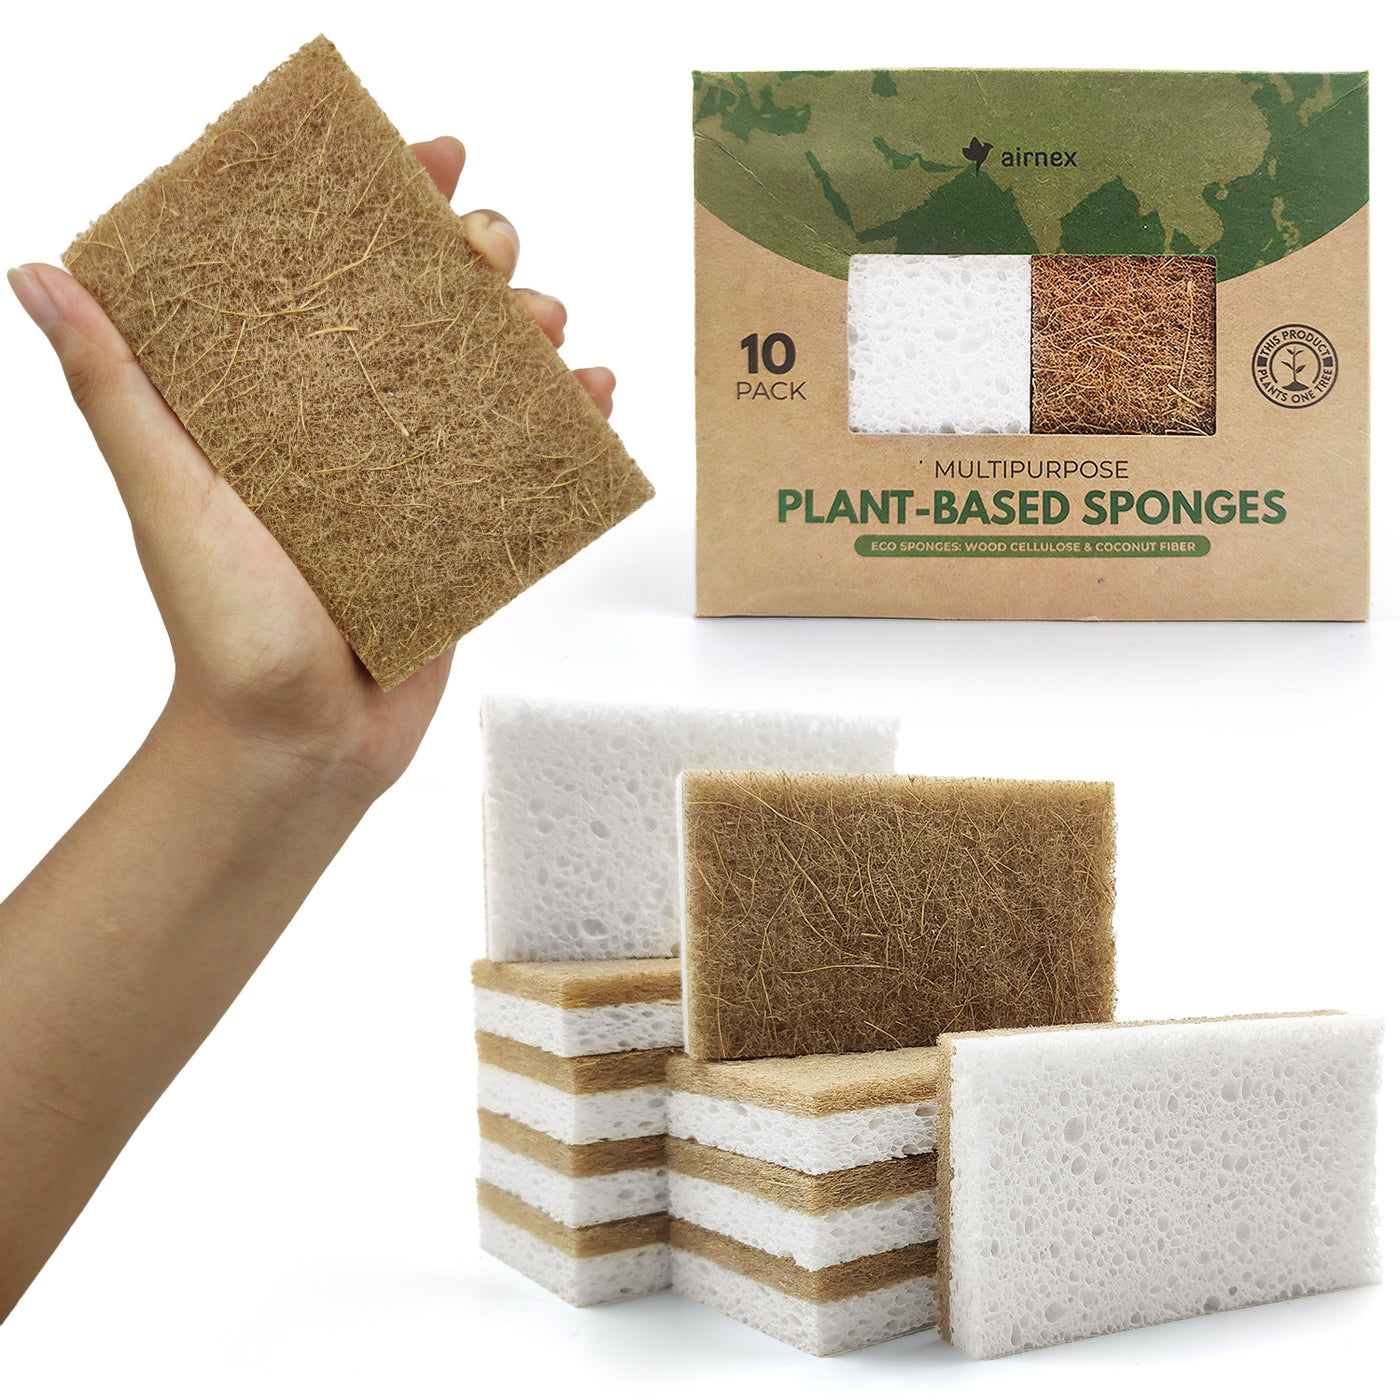 Kitchen Cleaning Sponges Eco Non-Scratch for Dish Scrub Sponges Pack of 10  